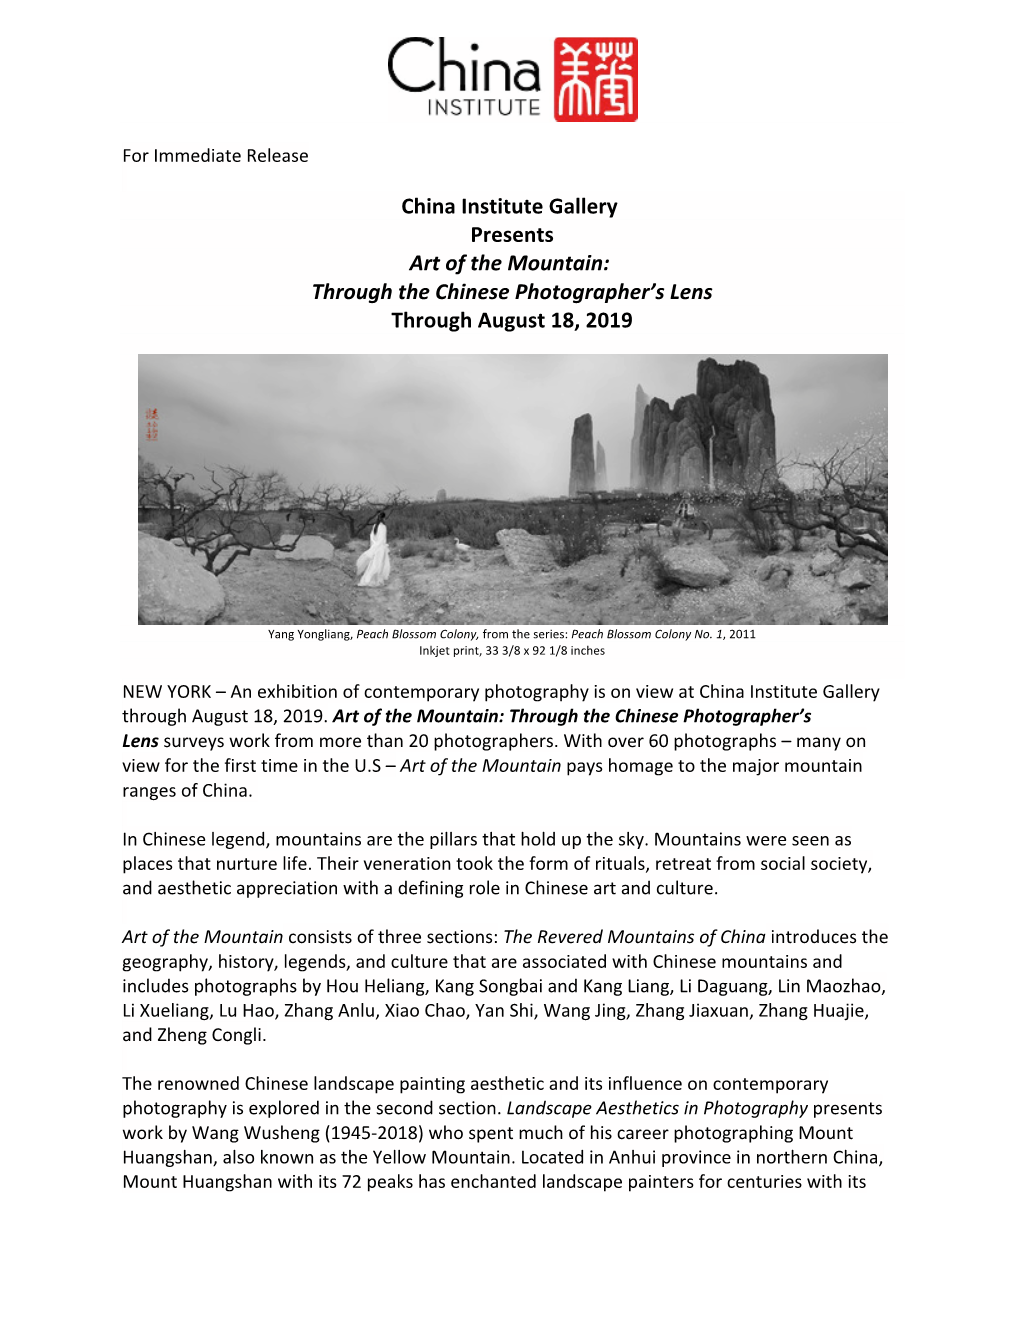 China Institute Gallery Presents Art of the Mountain: Through the Chinese Photographer’S Lens Through August 18, 2019